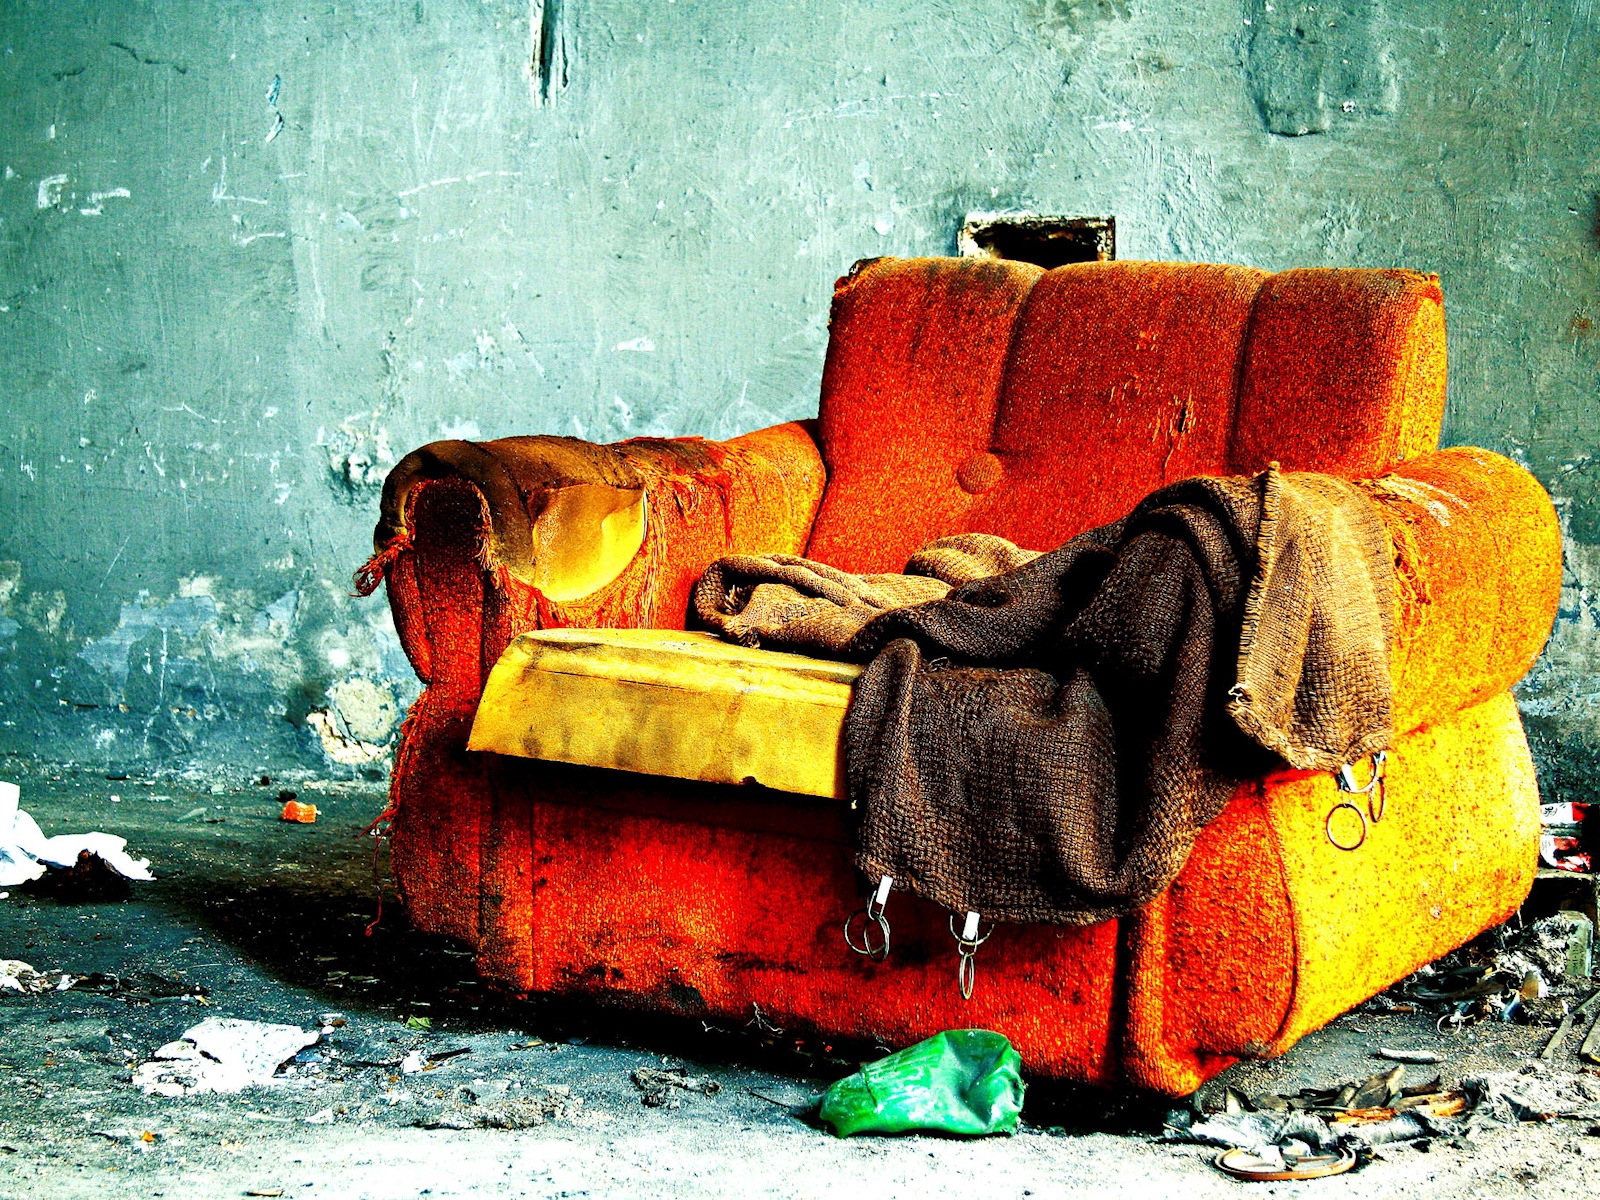 colourful, miscellanea, miscellaneous, old, colorful, armchair, ancient, ragged